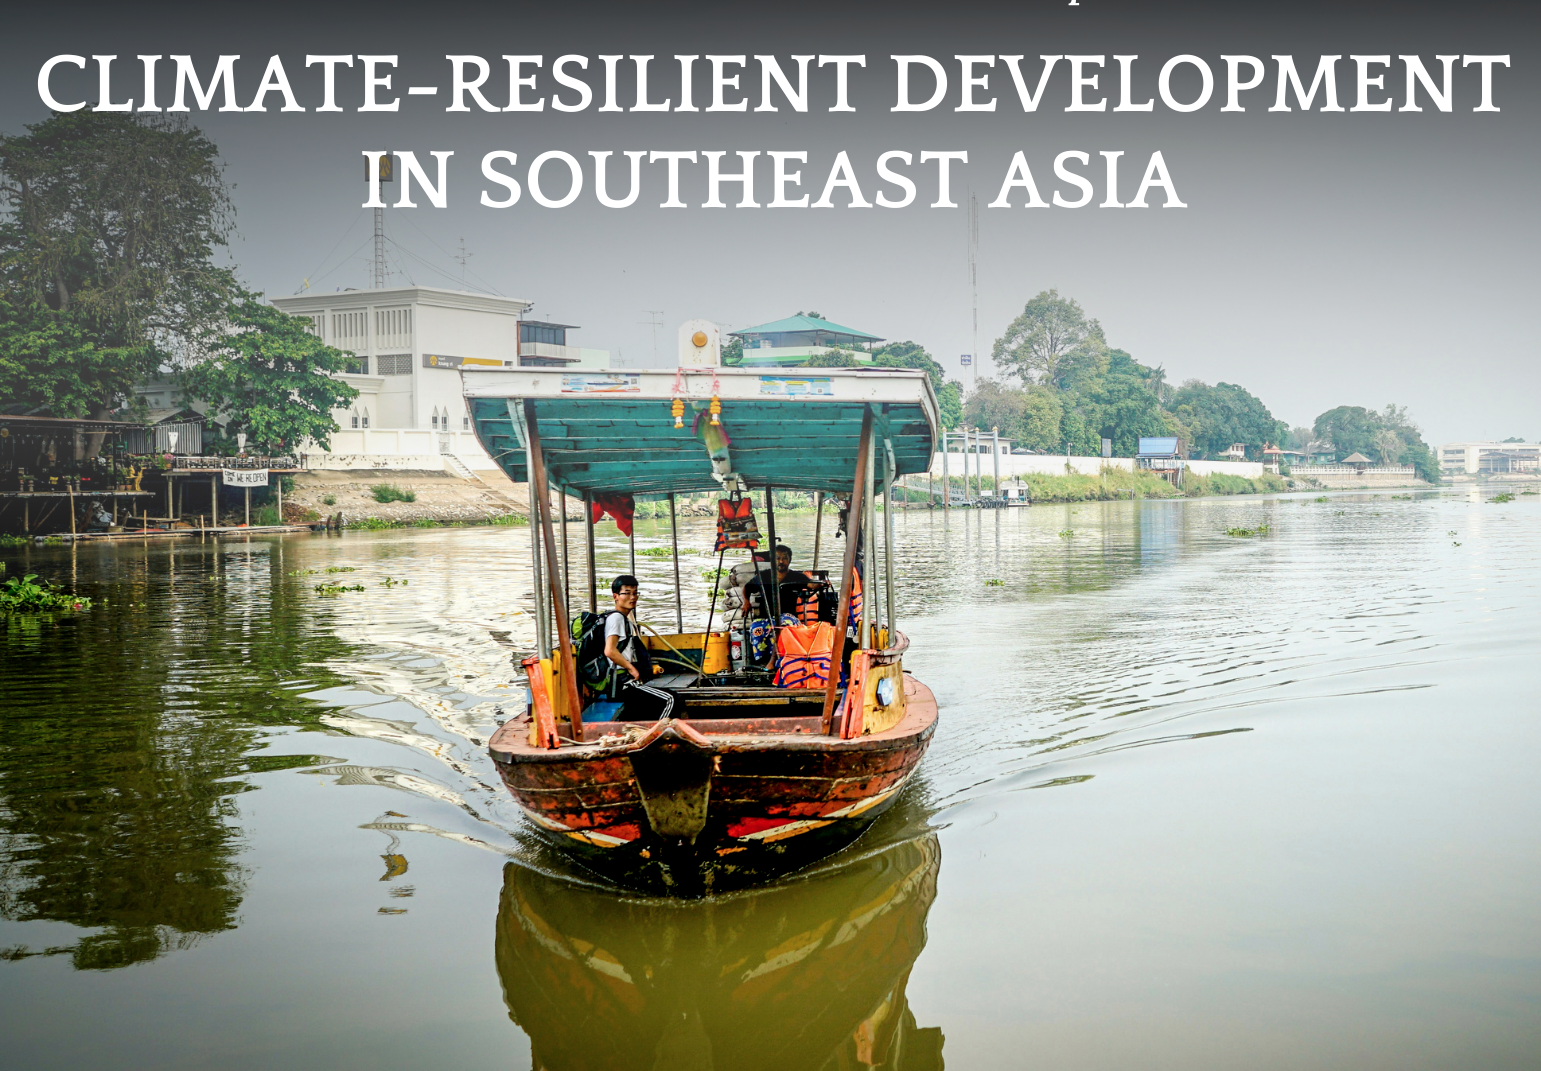 l Workshop on Climate-Resilient Development in Southeast Asia